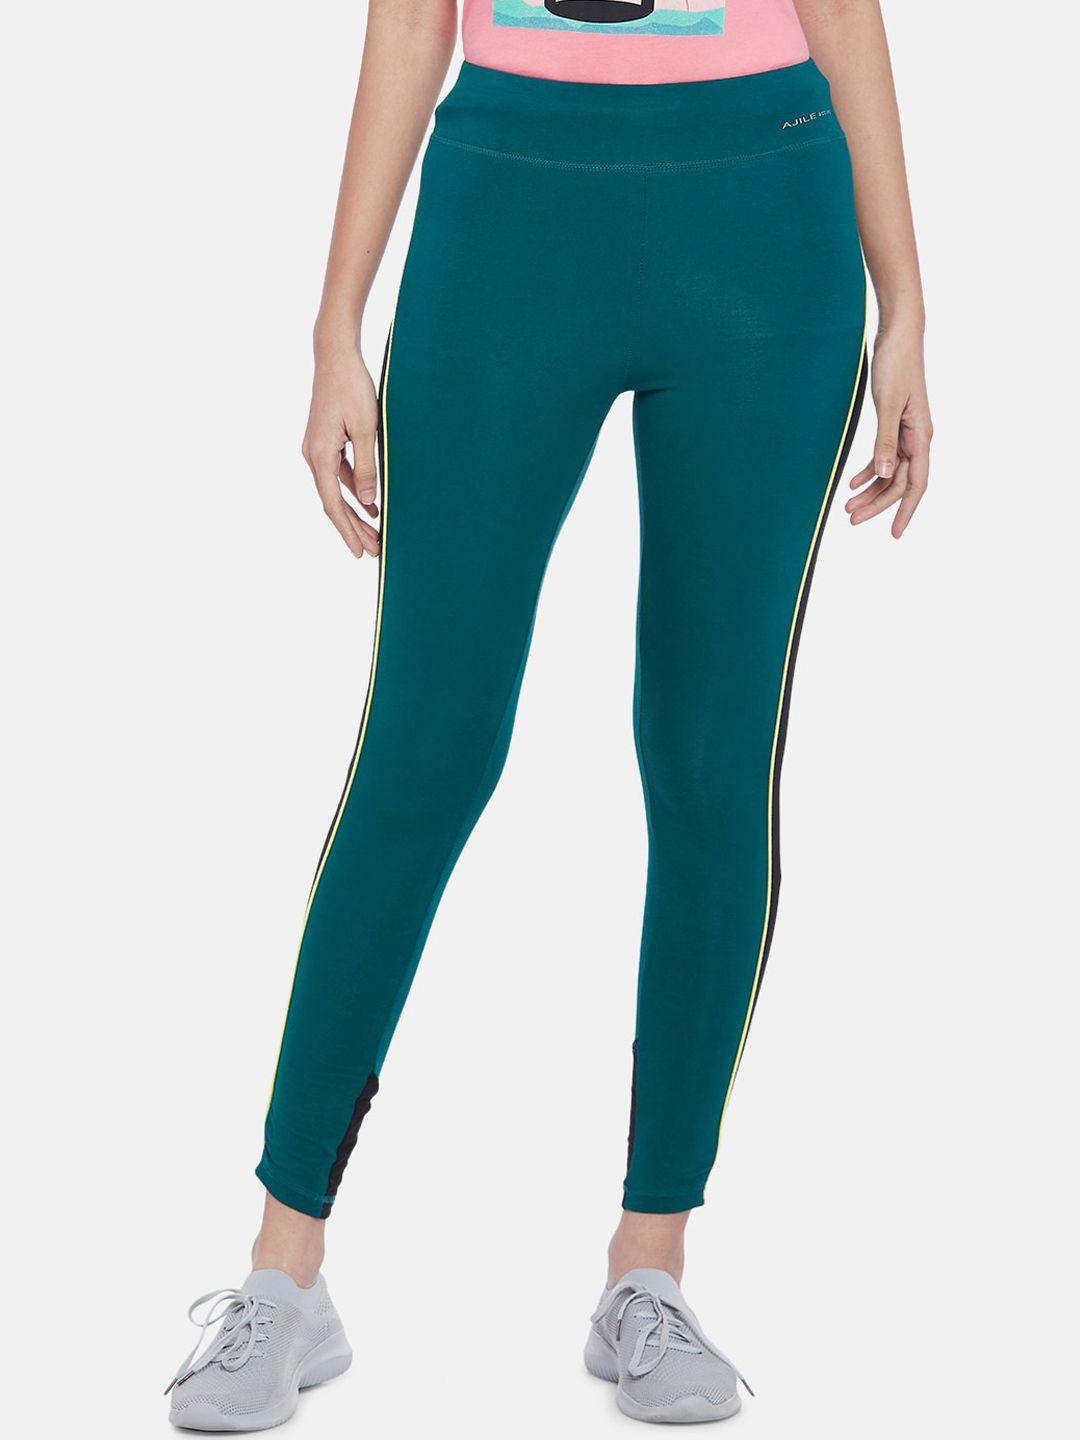 ajile by pantaloons women teal green solid ankle-length sports tights